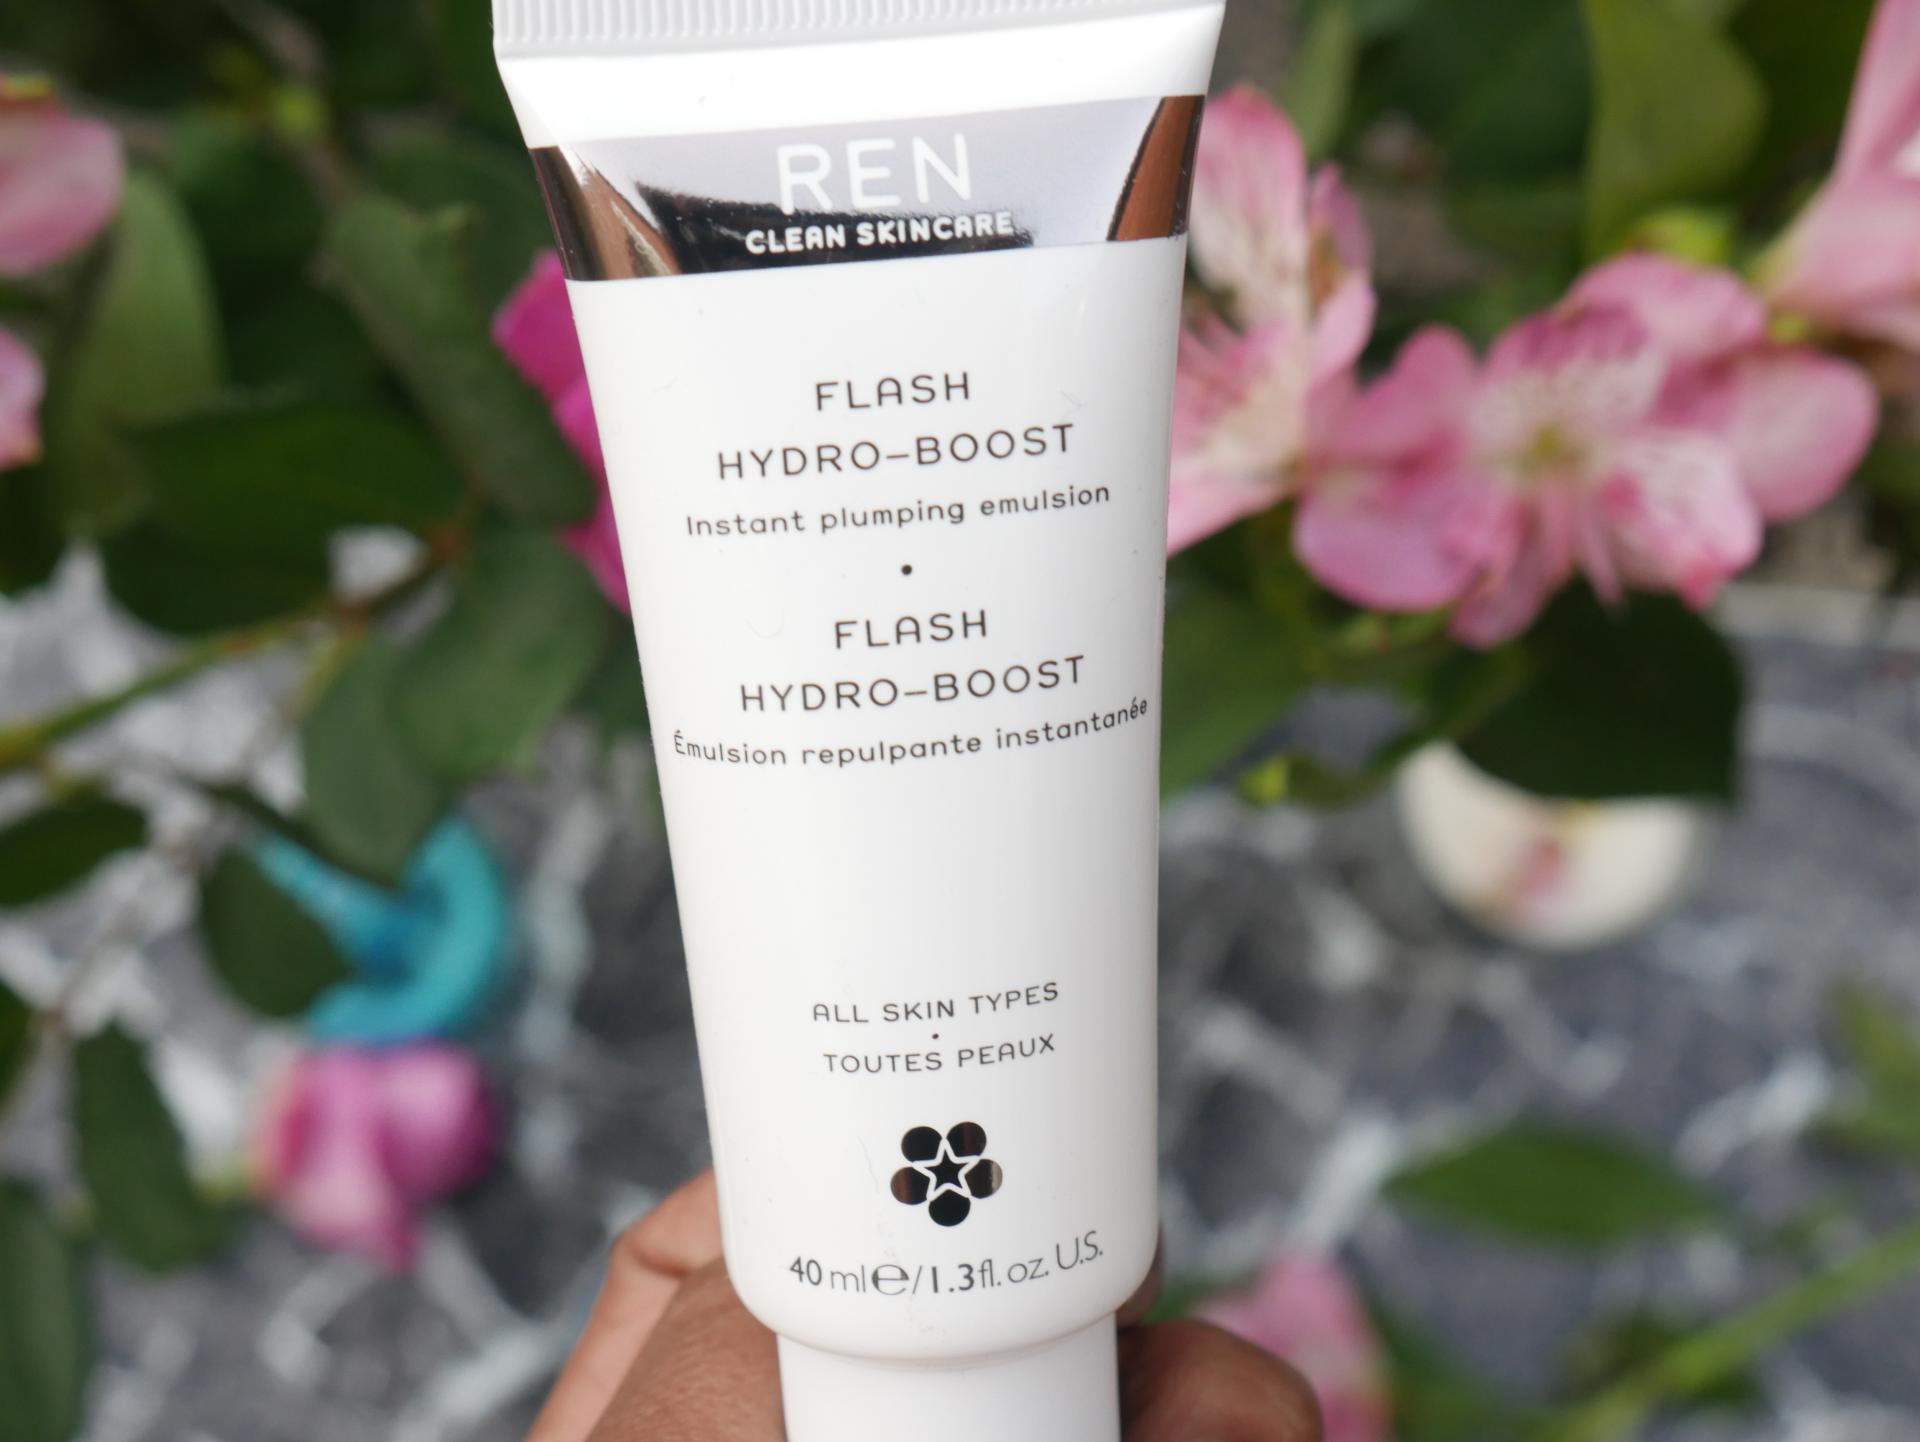 Flash Hydro-Boost Review | I tried the REN Skincare Flash-Hydro Boost and this is my full review, with pictures. Cost, cruelty-free status, ingredients, skin type suitability, and of course, my results. #skincare #flashhydrate #crueltyfreeskincare #hyaluronic #review